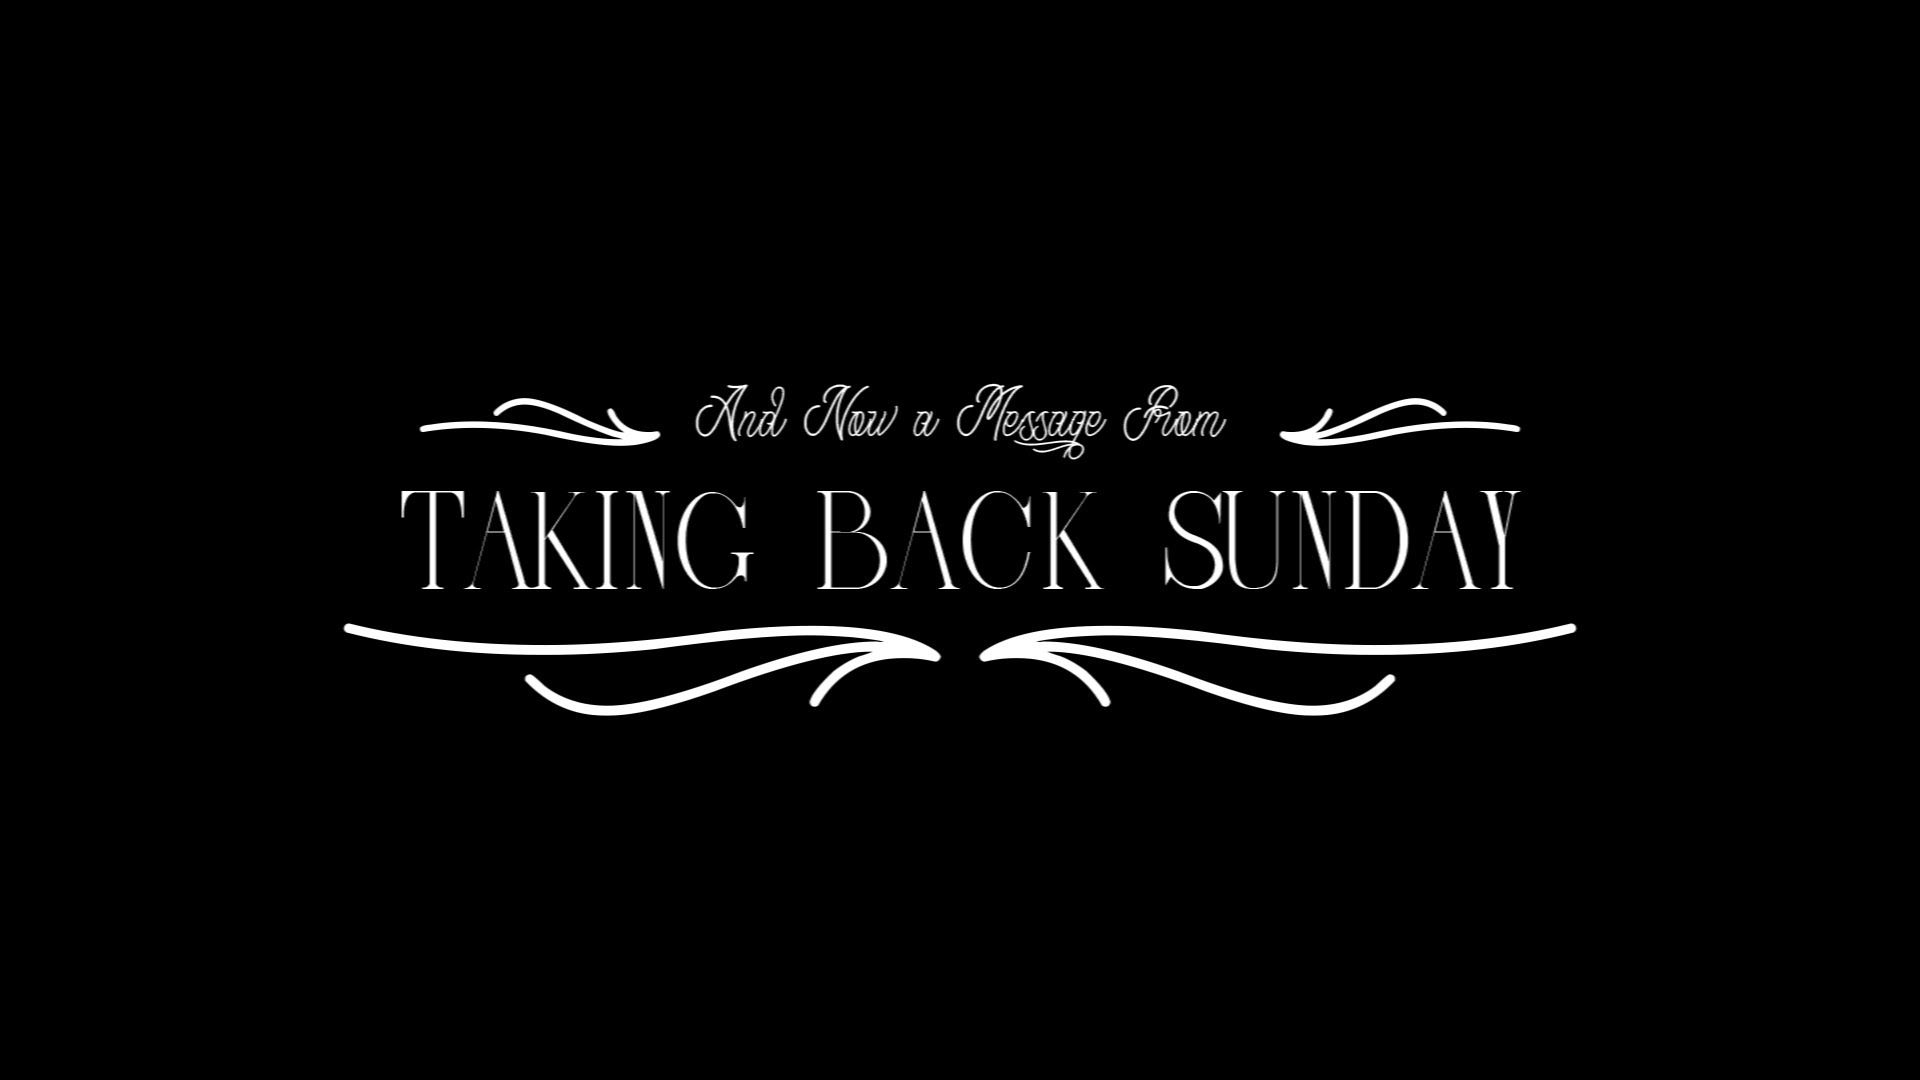 Pre-Order Taking Back Sunday's New Album Happiness Is - YouTube